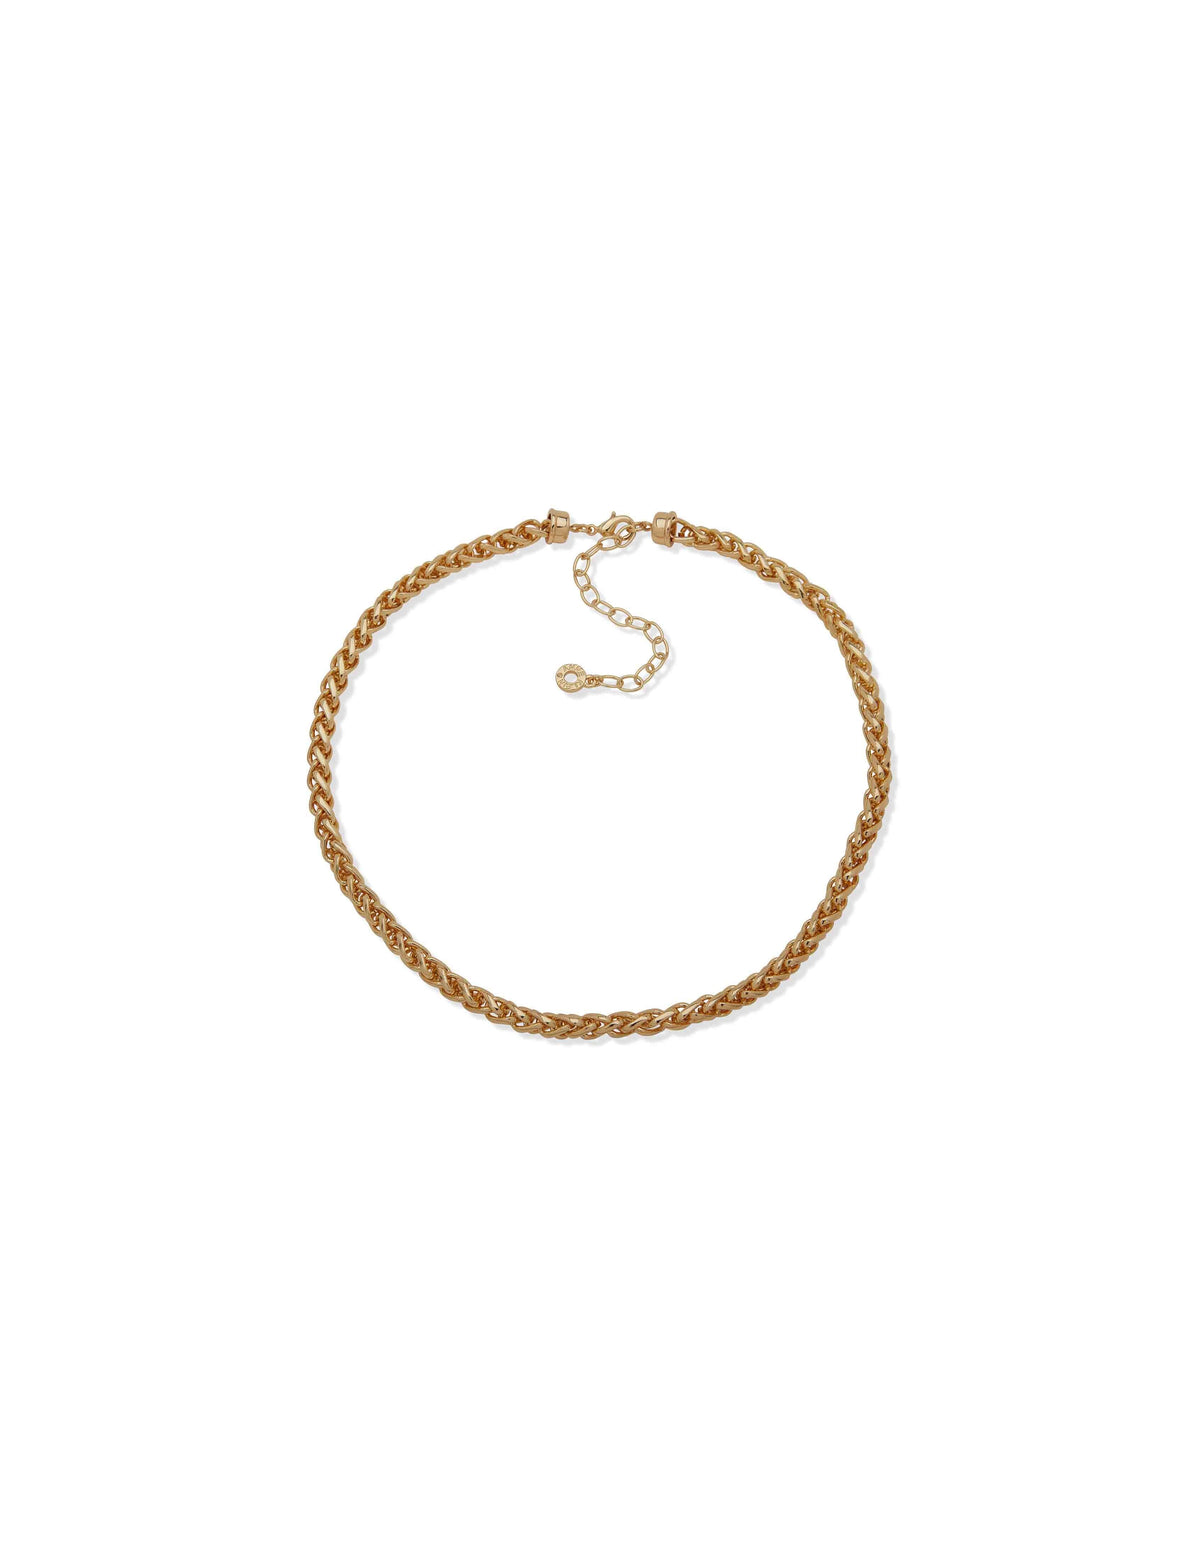 Anne Klein Gold Tone Gold-Tone Woven Chain Collar Necklace